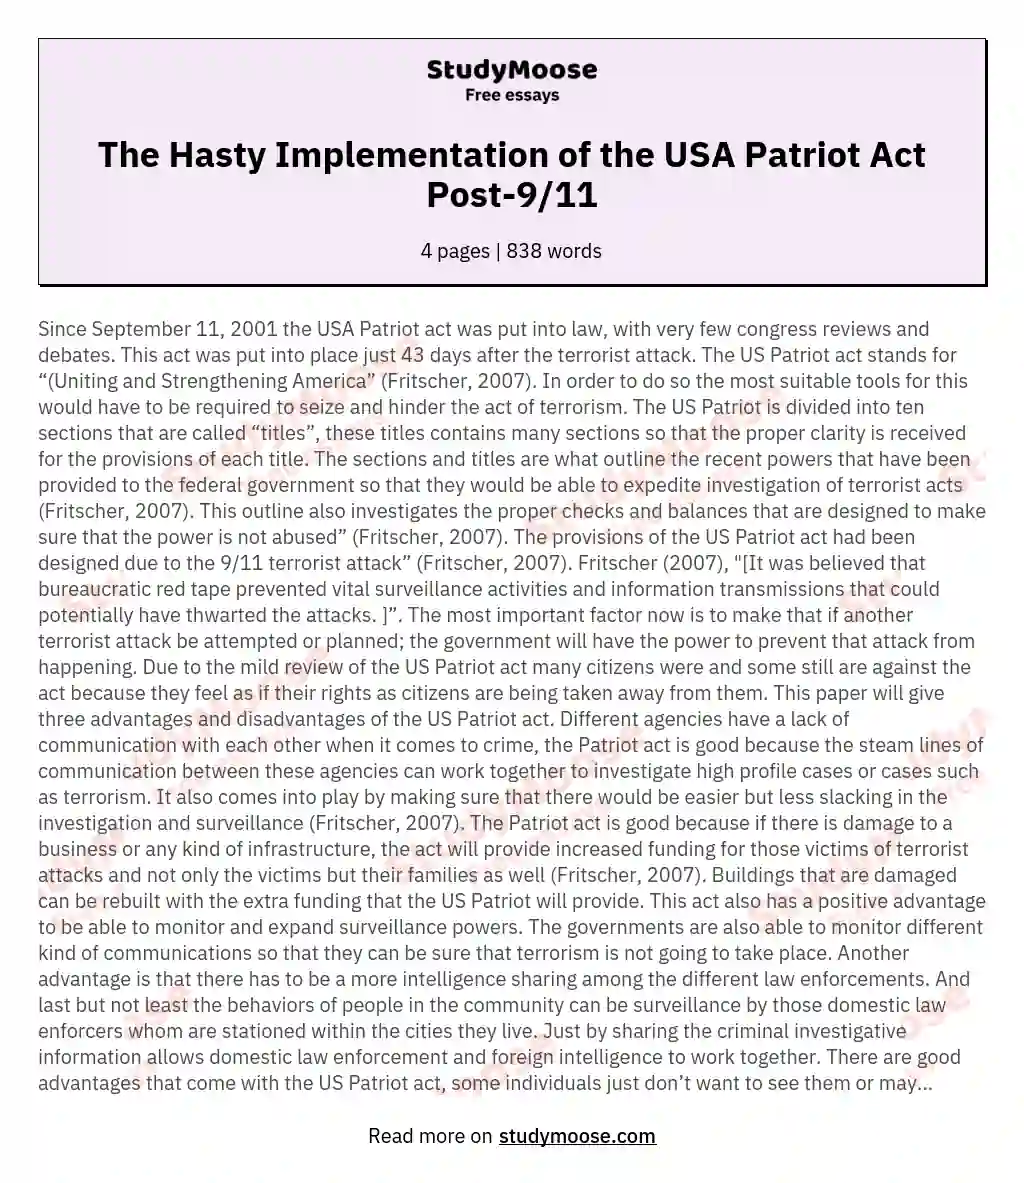 The Hasty Implementation of the USA Patriot Act Post-9/11 essay